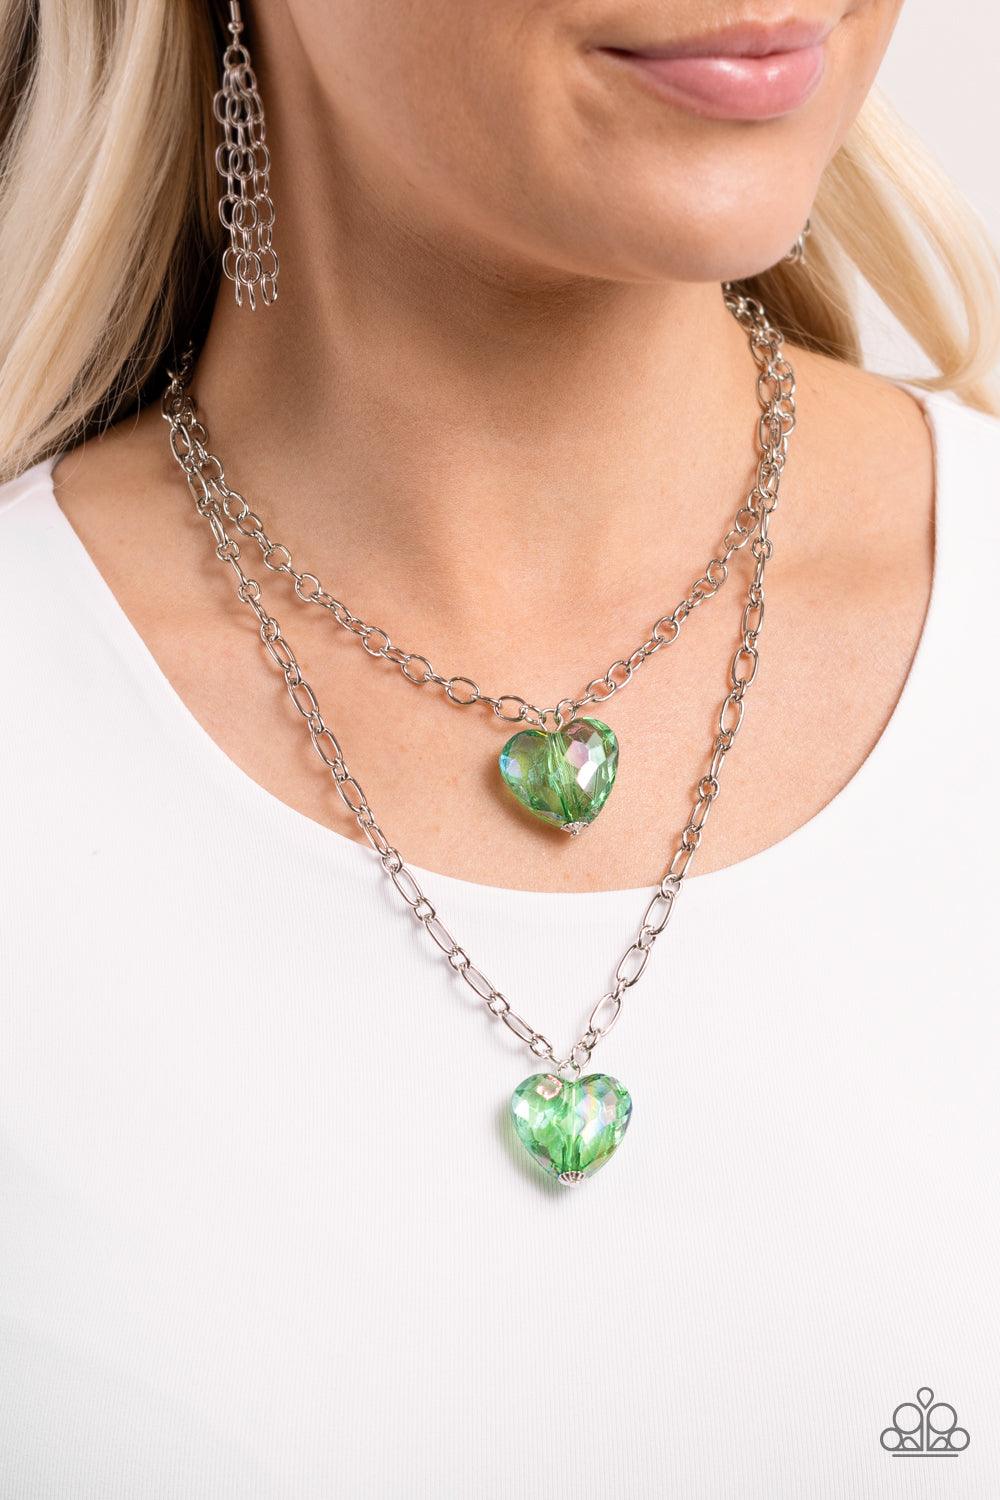 Paparazzi Accessories - Layered Love - Green Necklace - Bling by JessieK